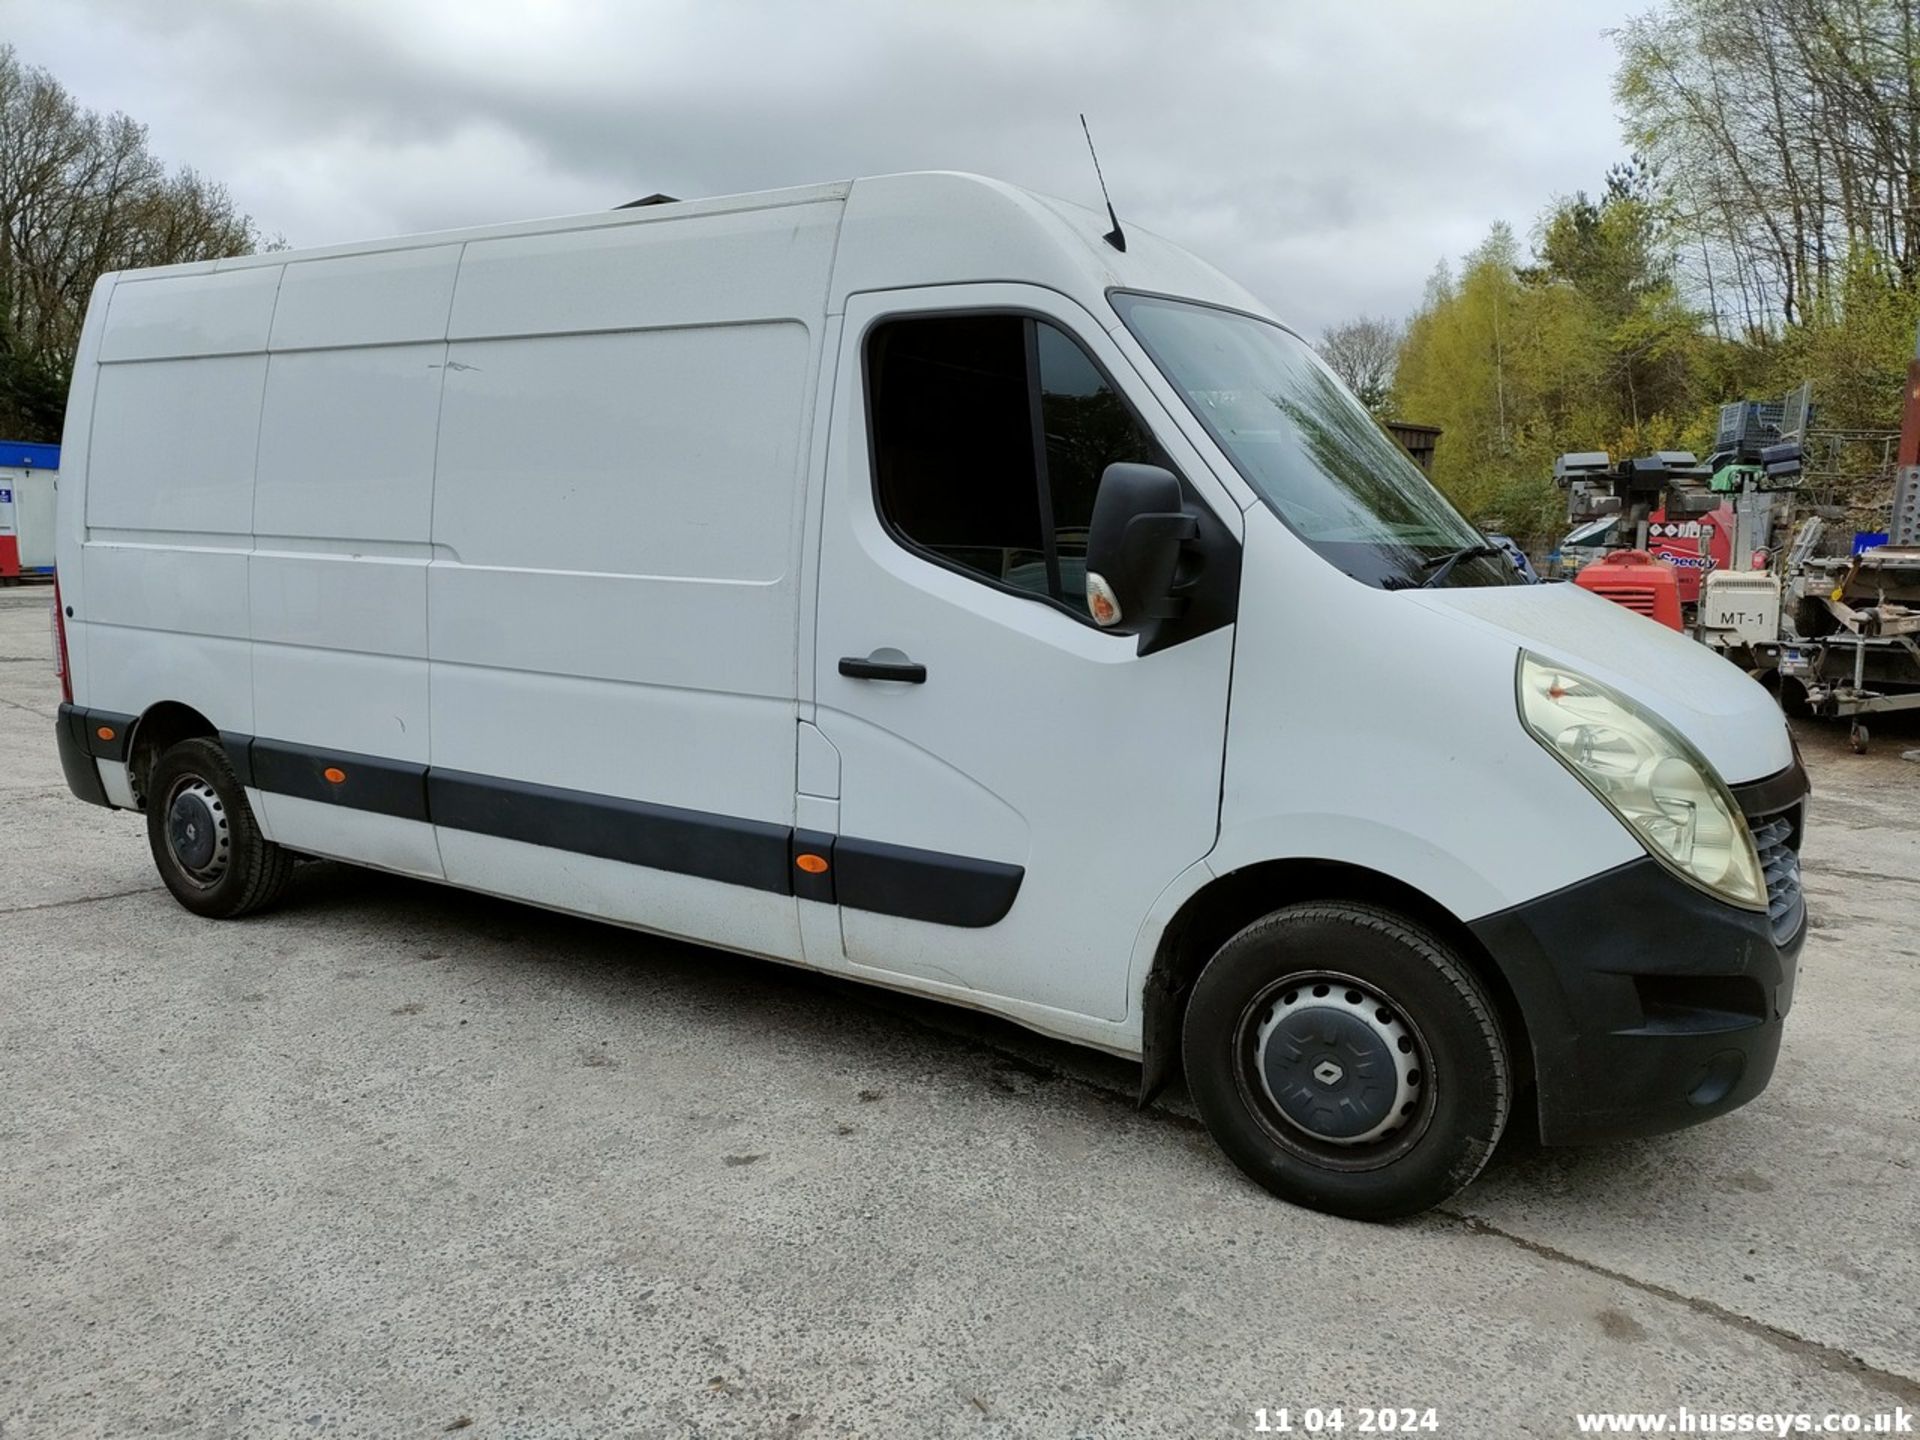 18/68 RENAULT MASTER LM35 BUSINESS DCI - 2298cc 5dr Van (White) - Image 2 of 68